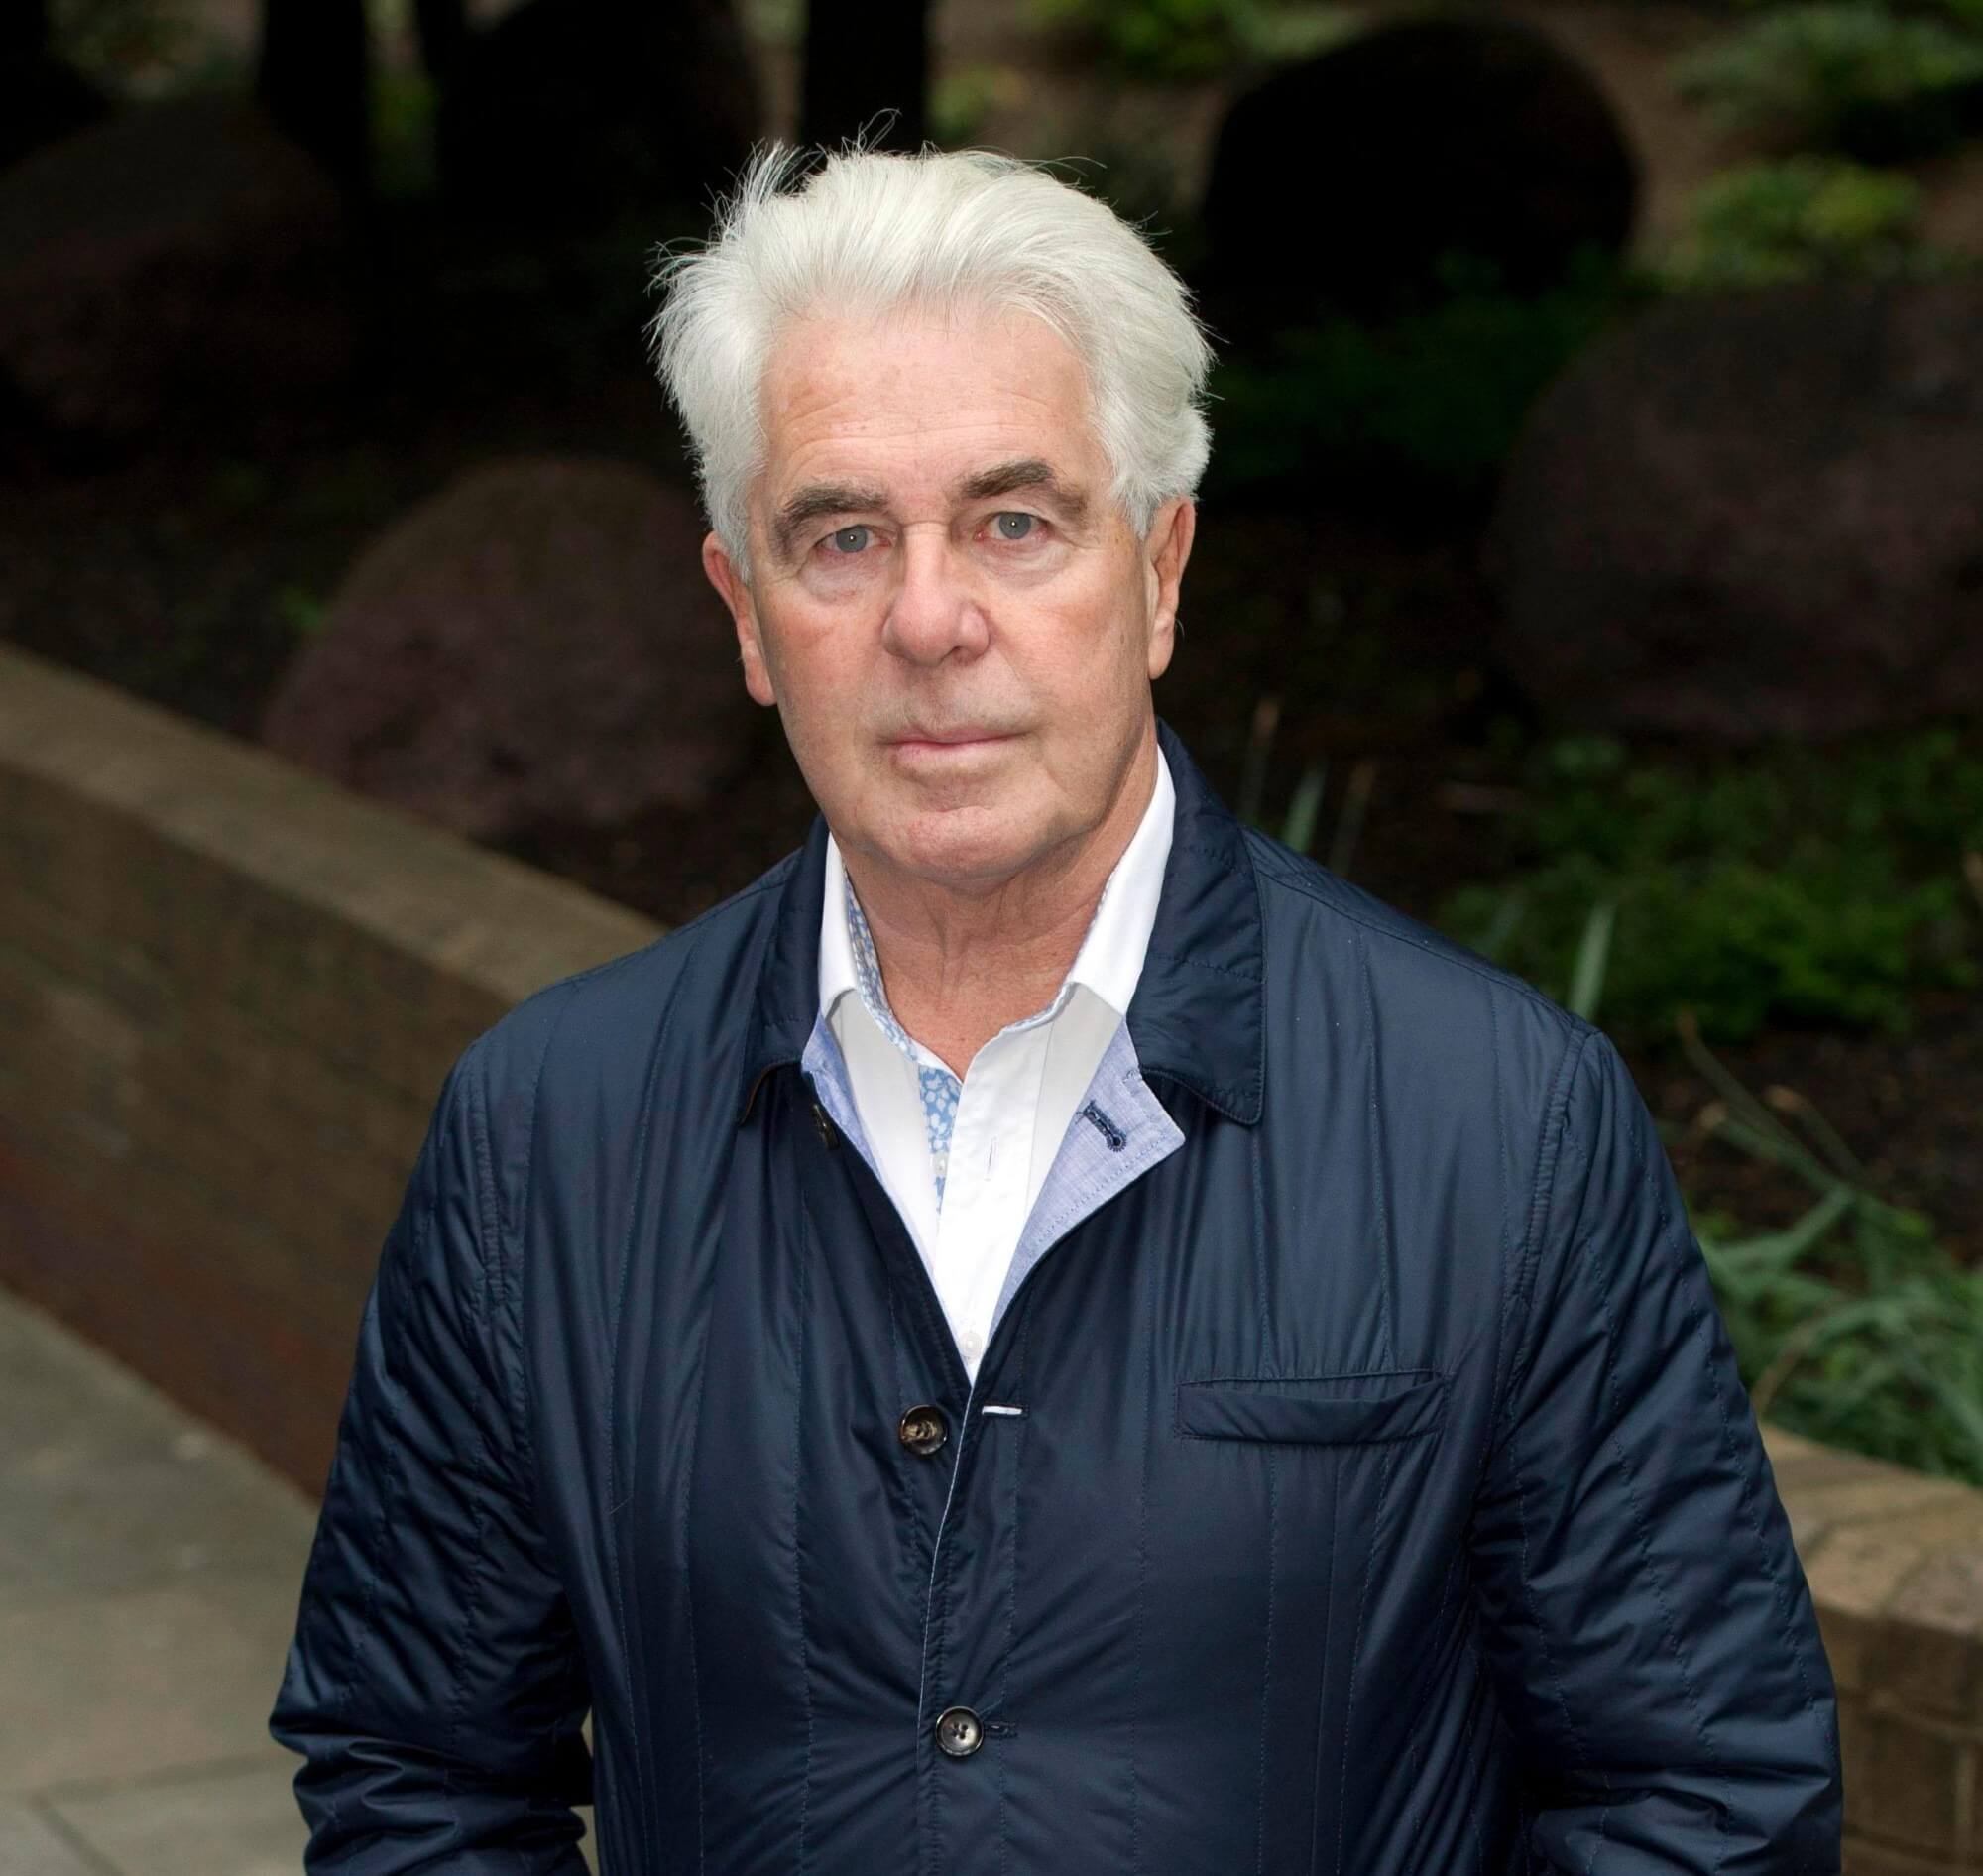 8 Surprising Facts About Max Clifford - Facts.net